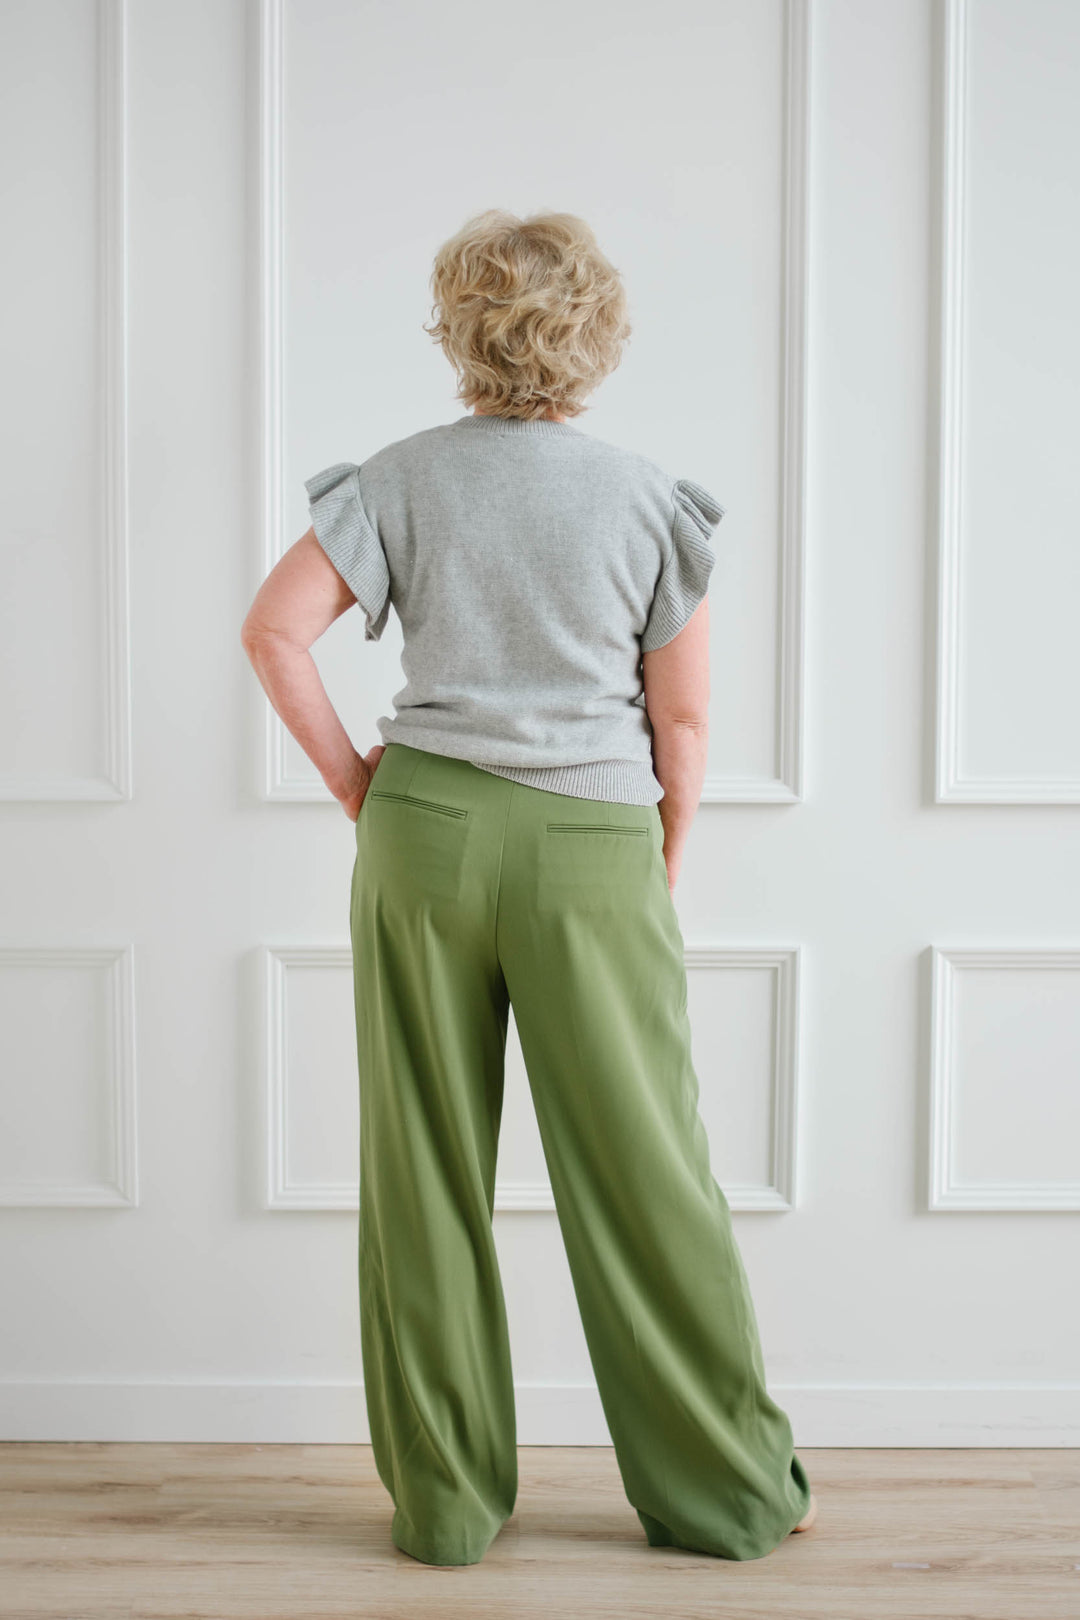 Pin Tucked Trousers - Pickle